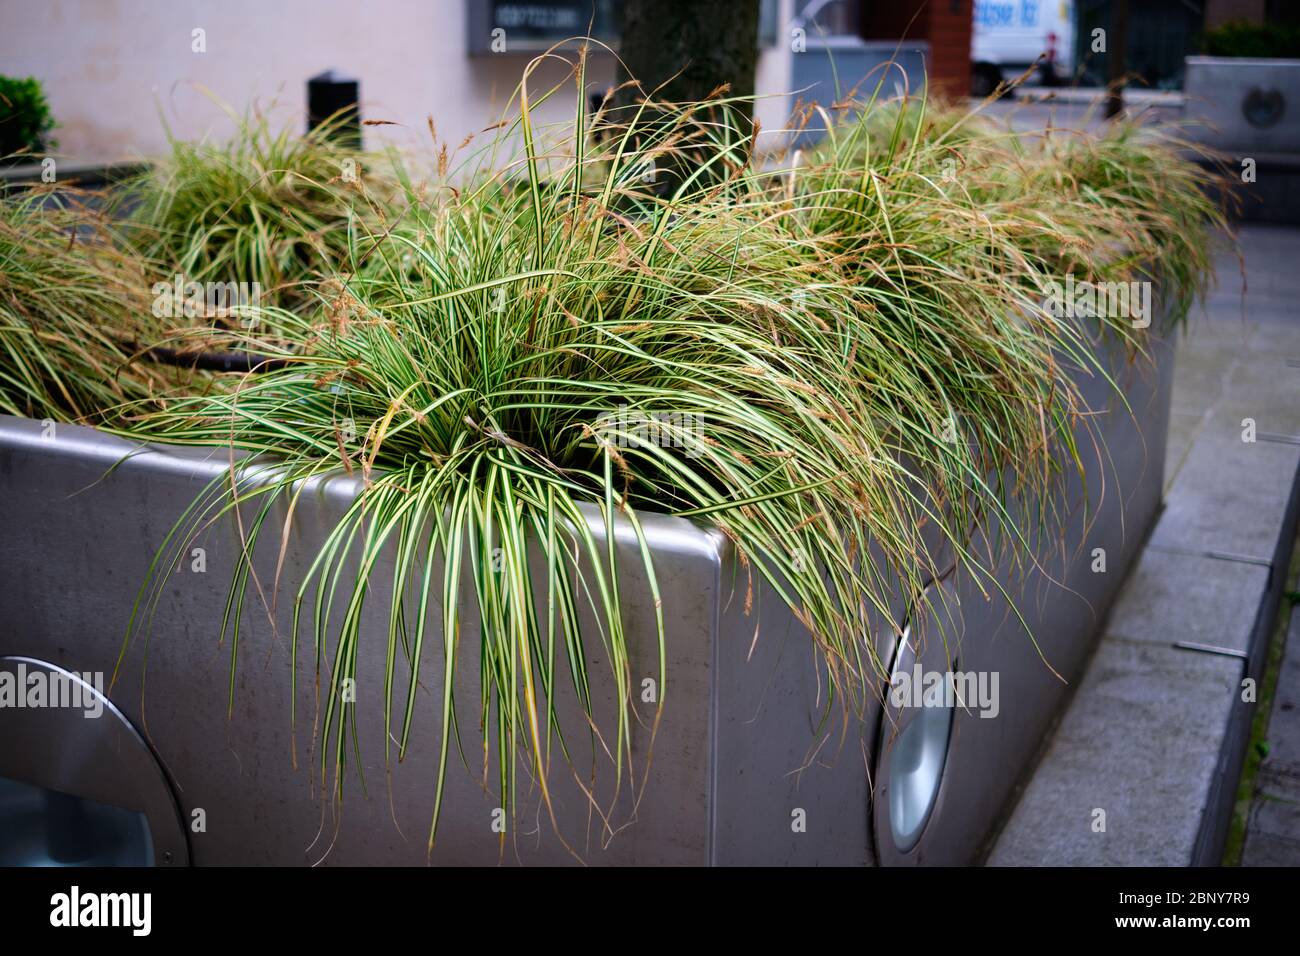 Japanese grass plant in a large metal plant bed Stock Photo